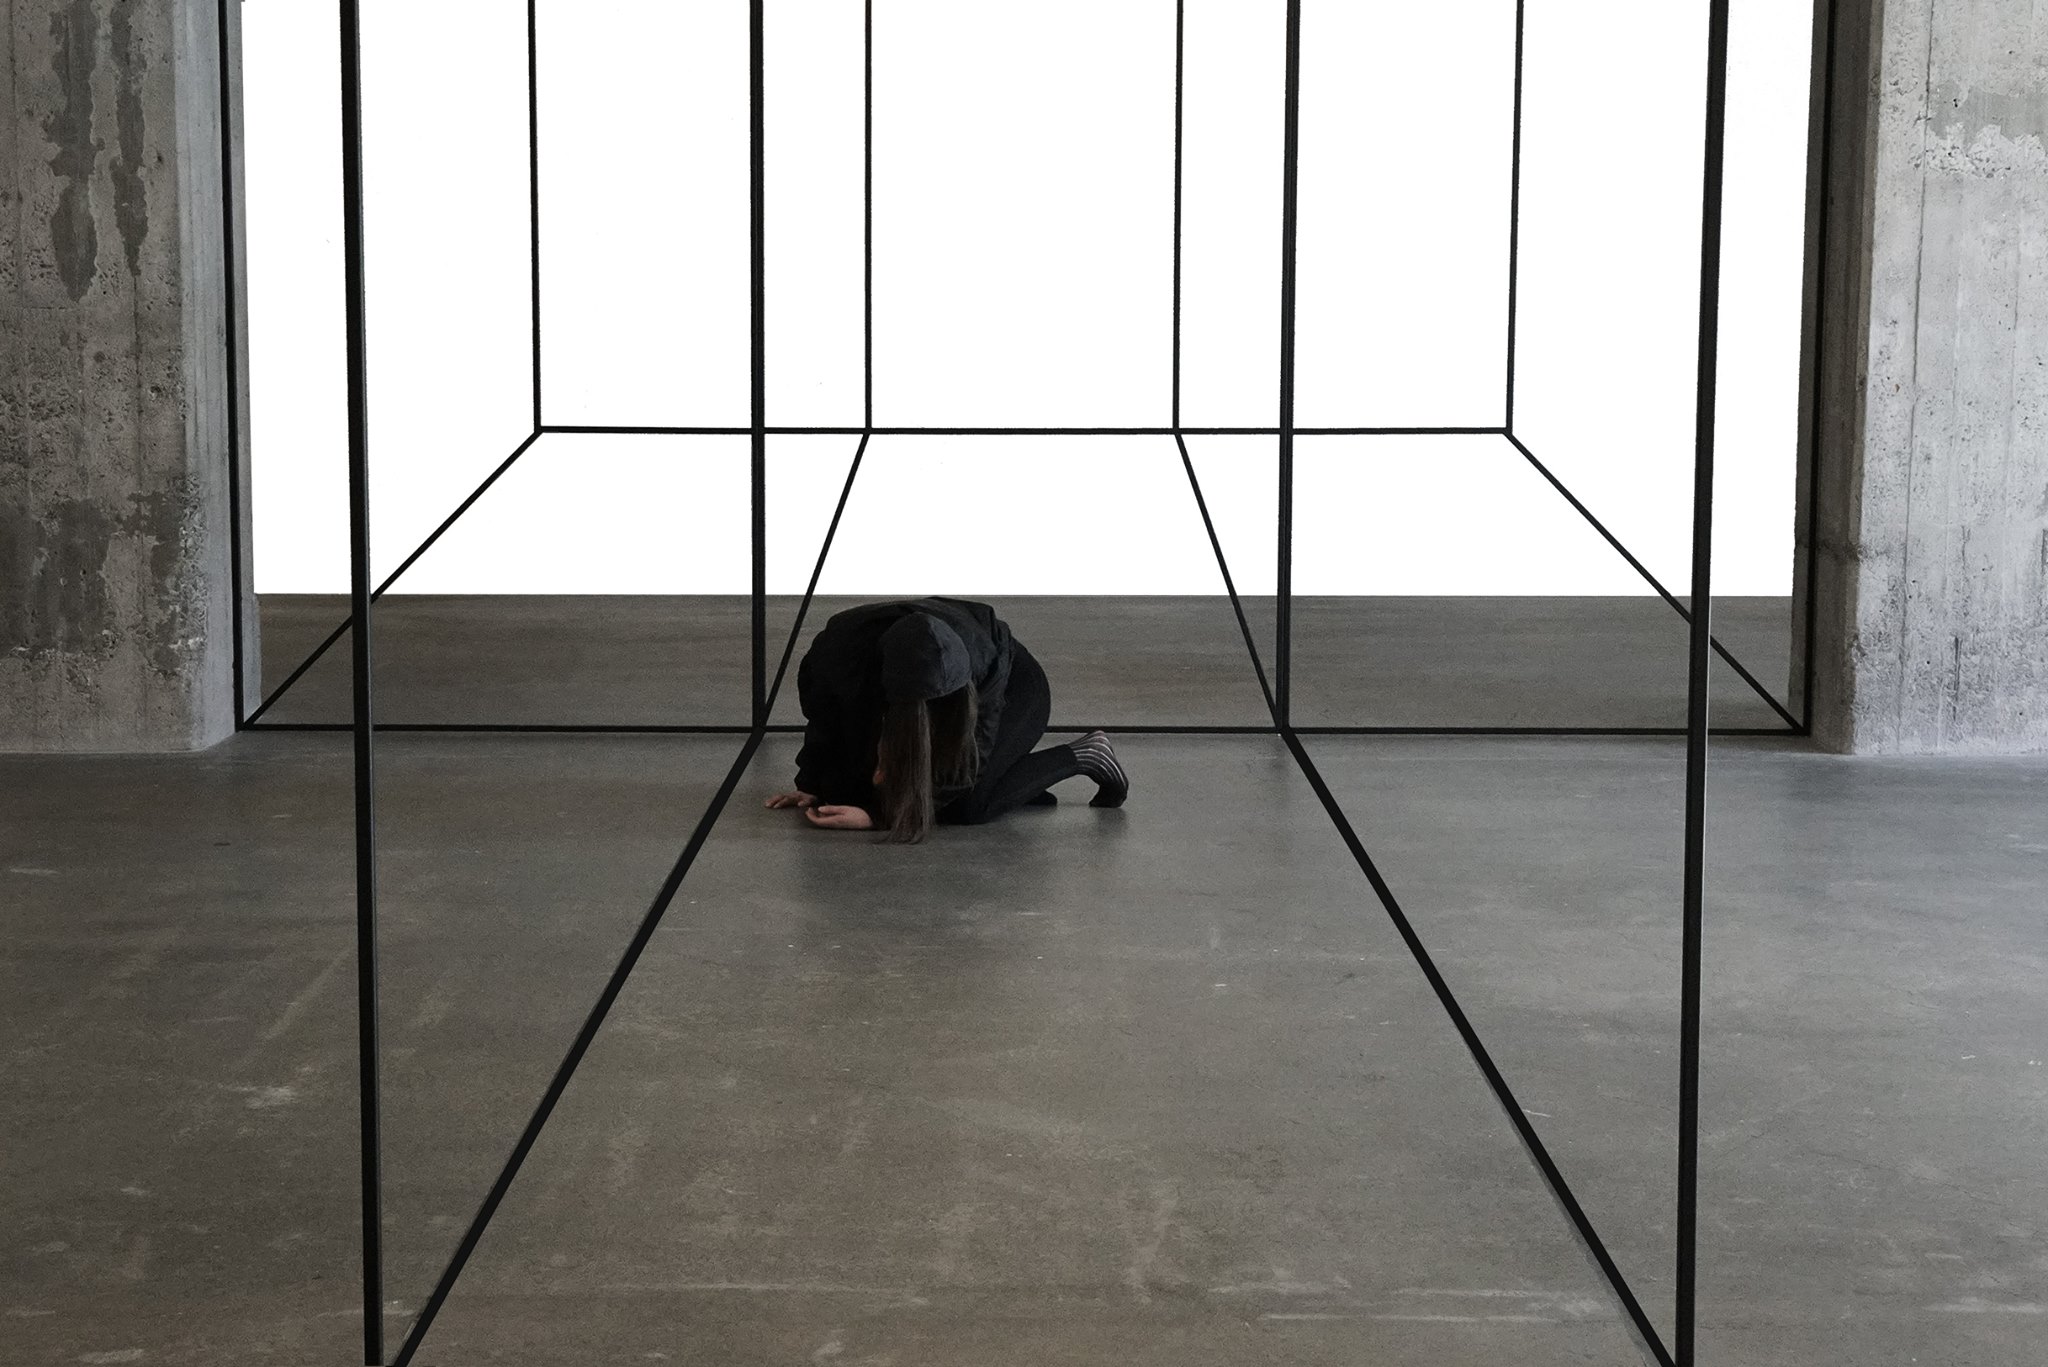 A figure crouch on the floor in a gallery like space, which also has metallic frames in it.